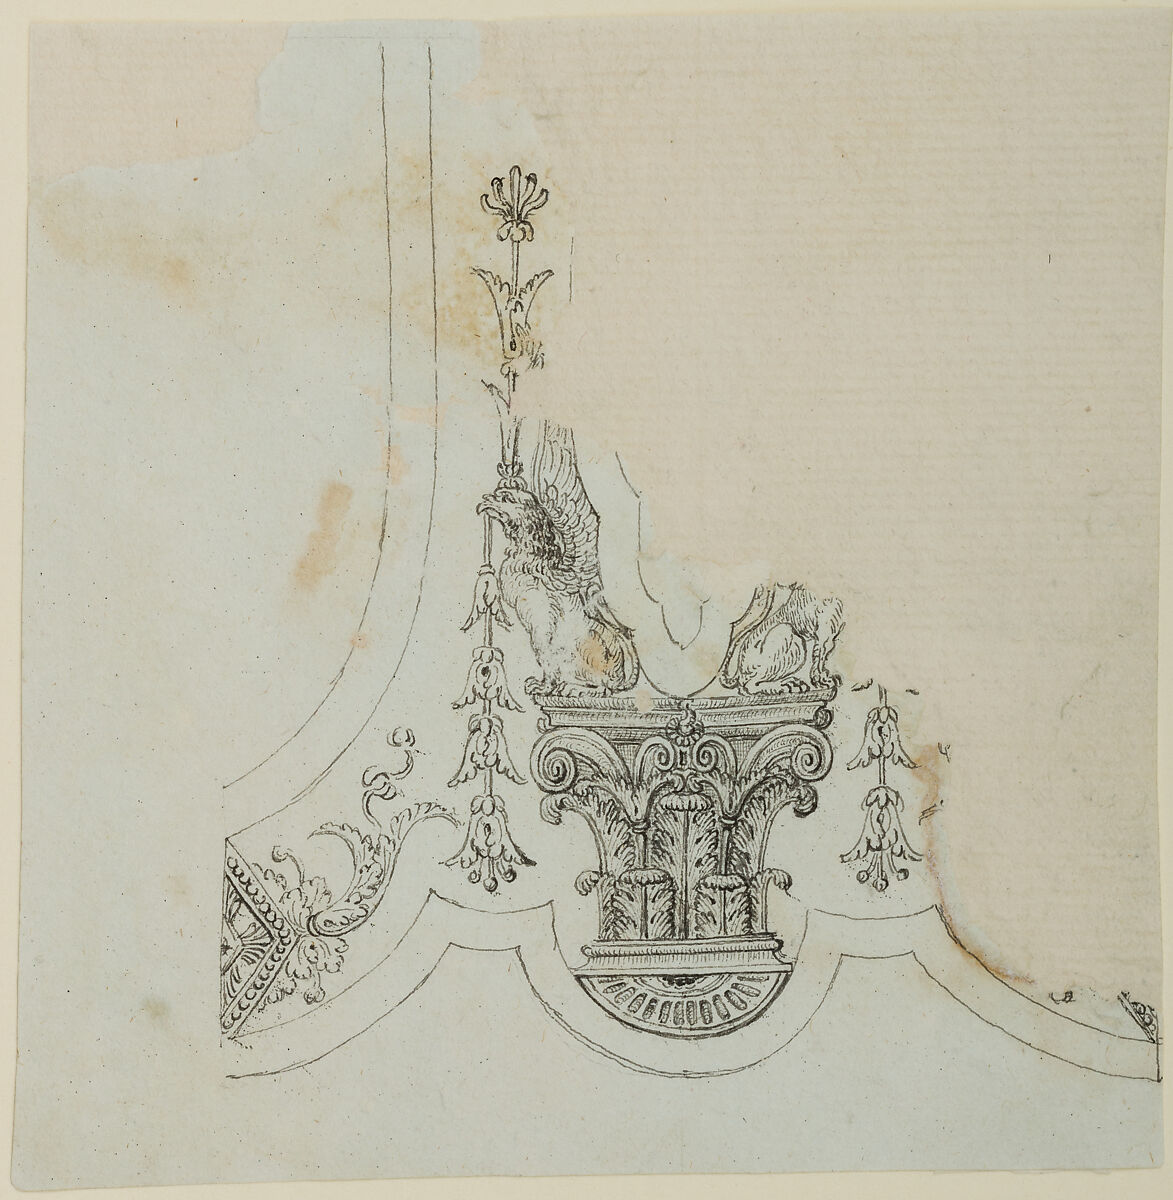 Partial Design for the Decoration of the Surround of the Barrel Tang of a Firearm, Workshop of Nicolas Noël Boutet (French, Versailles and Paris, 1761–1833), Pencil, ink, gray wash on paper, French, Versailles 